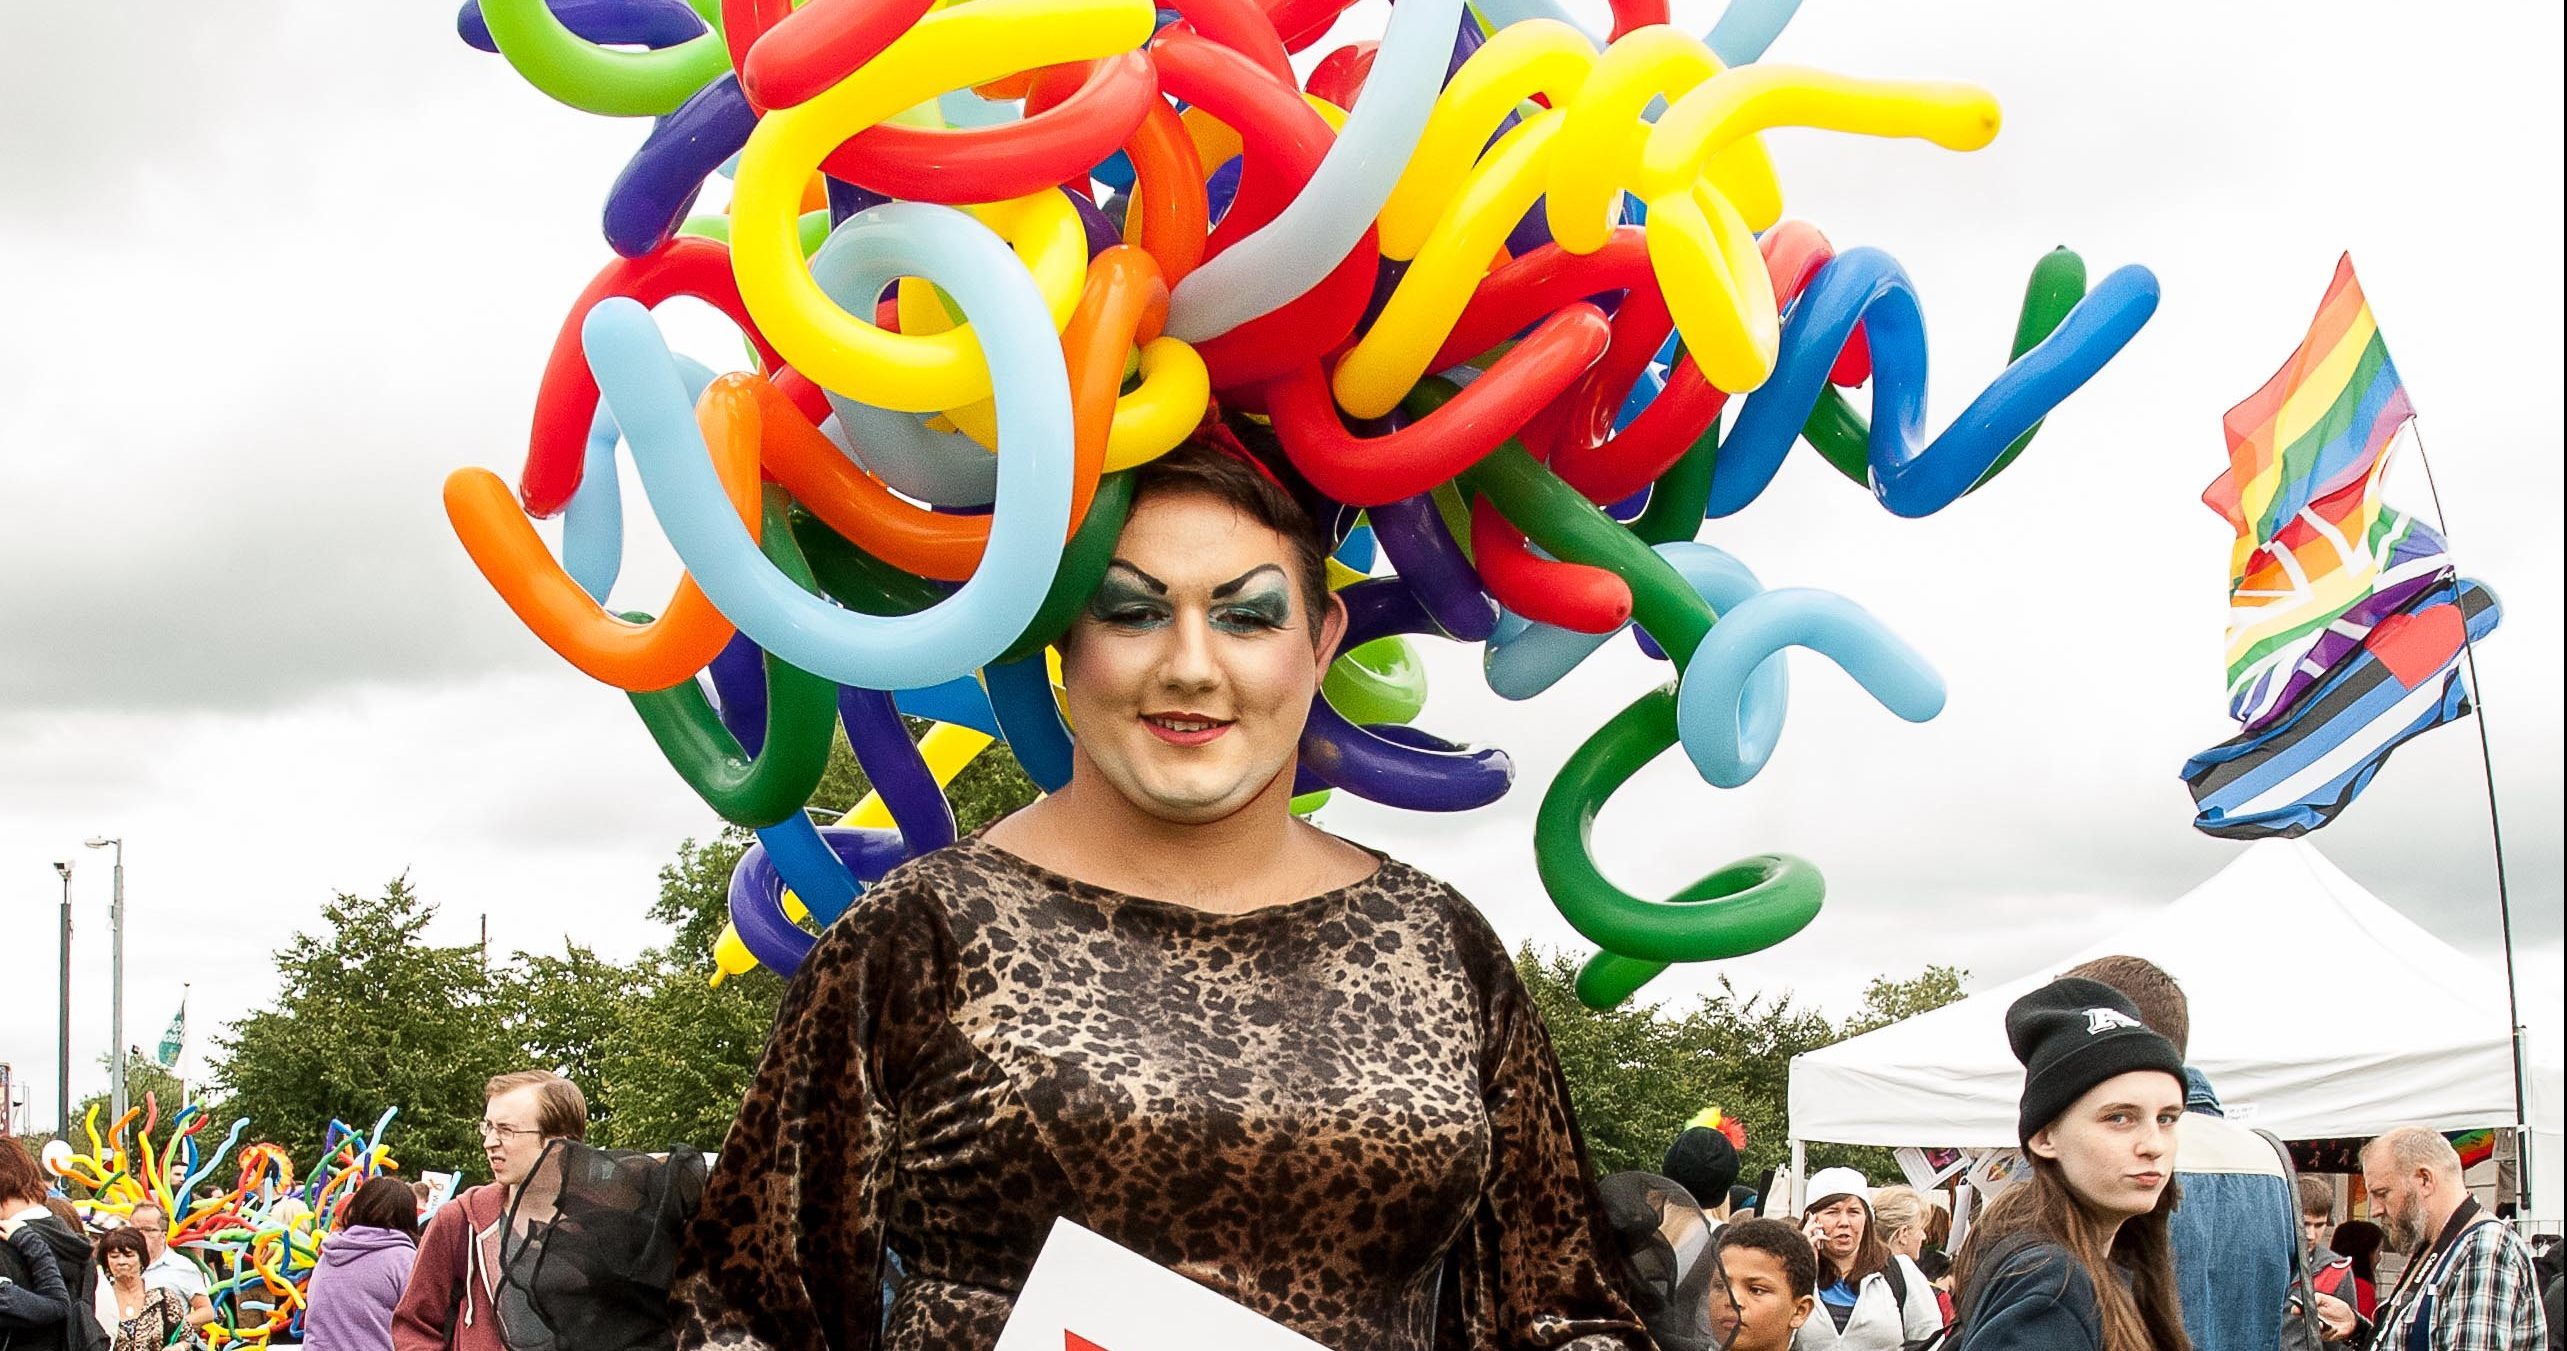 Nathan Sparling, aka drag queen Nancy Clench, will hosted the Kirkcaldy Pride event